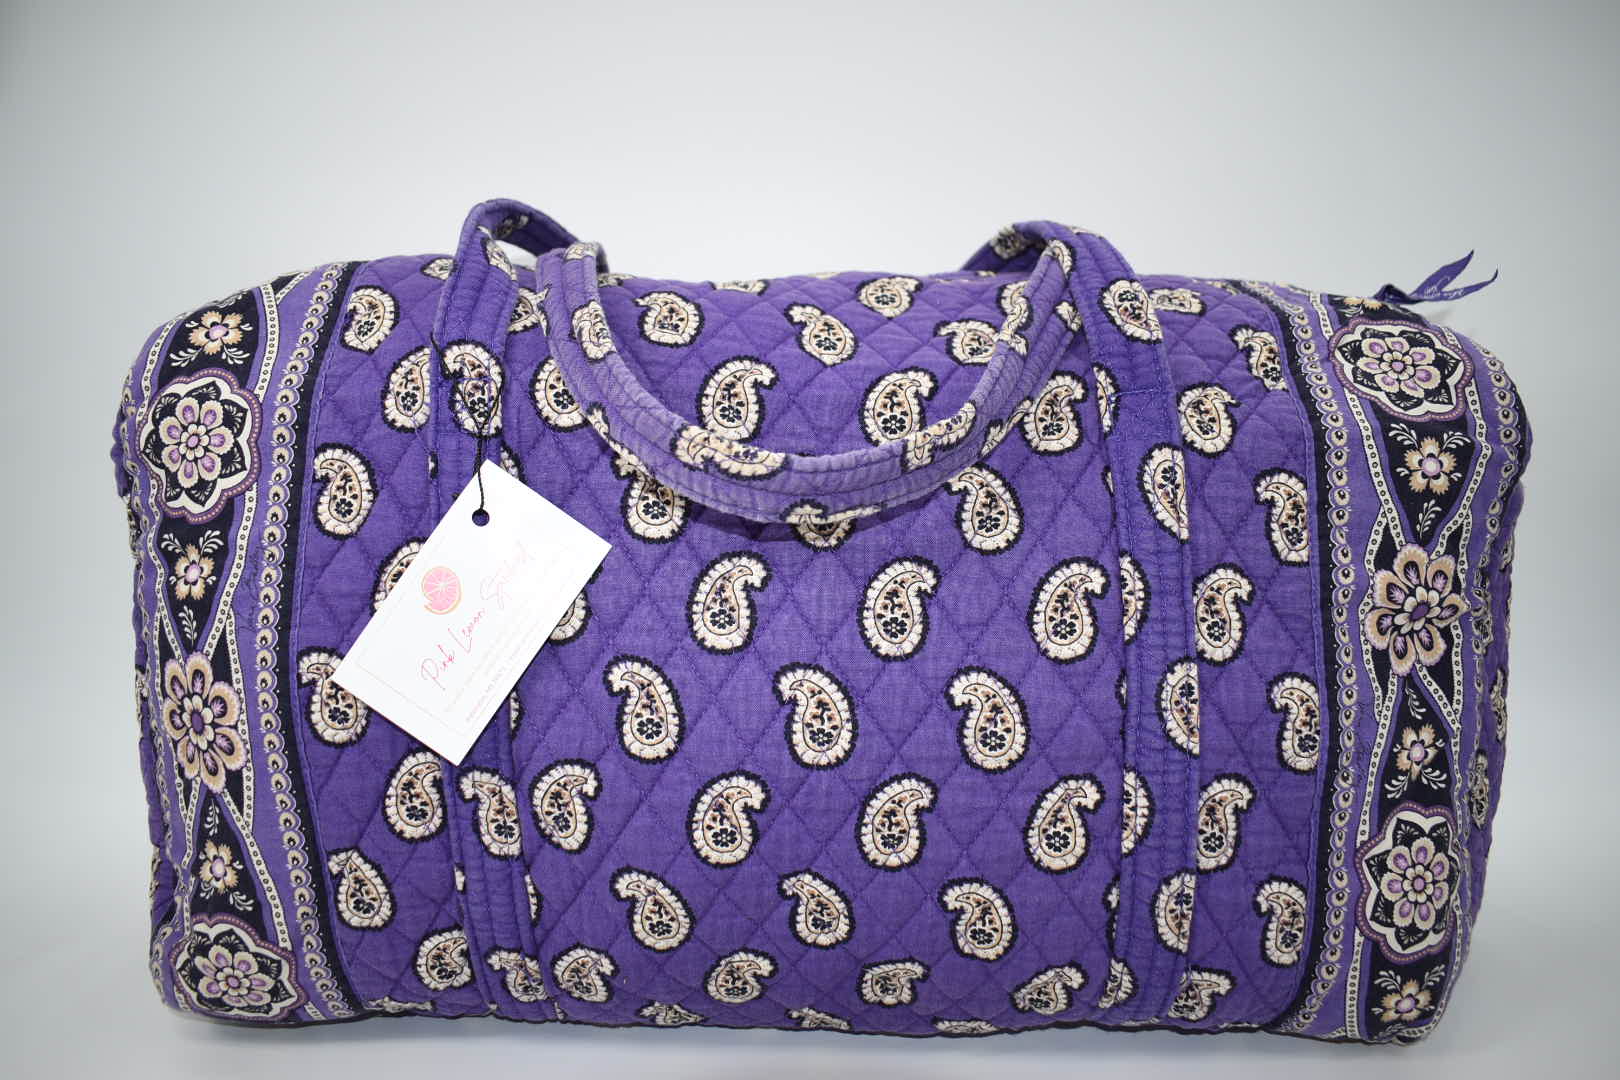 Vera Bradley Large Duffel, Signature Cotton, Lilac Tapestry in